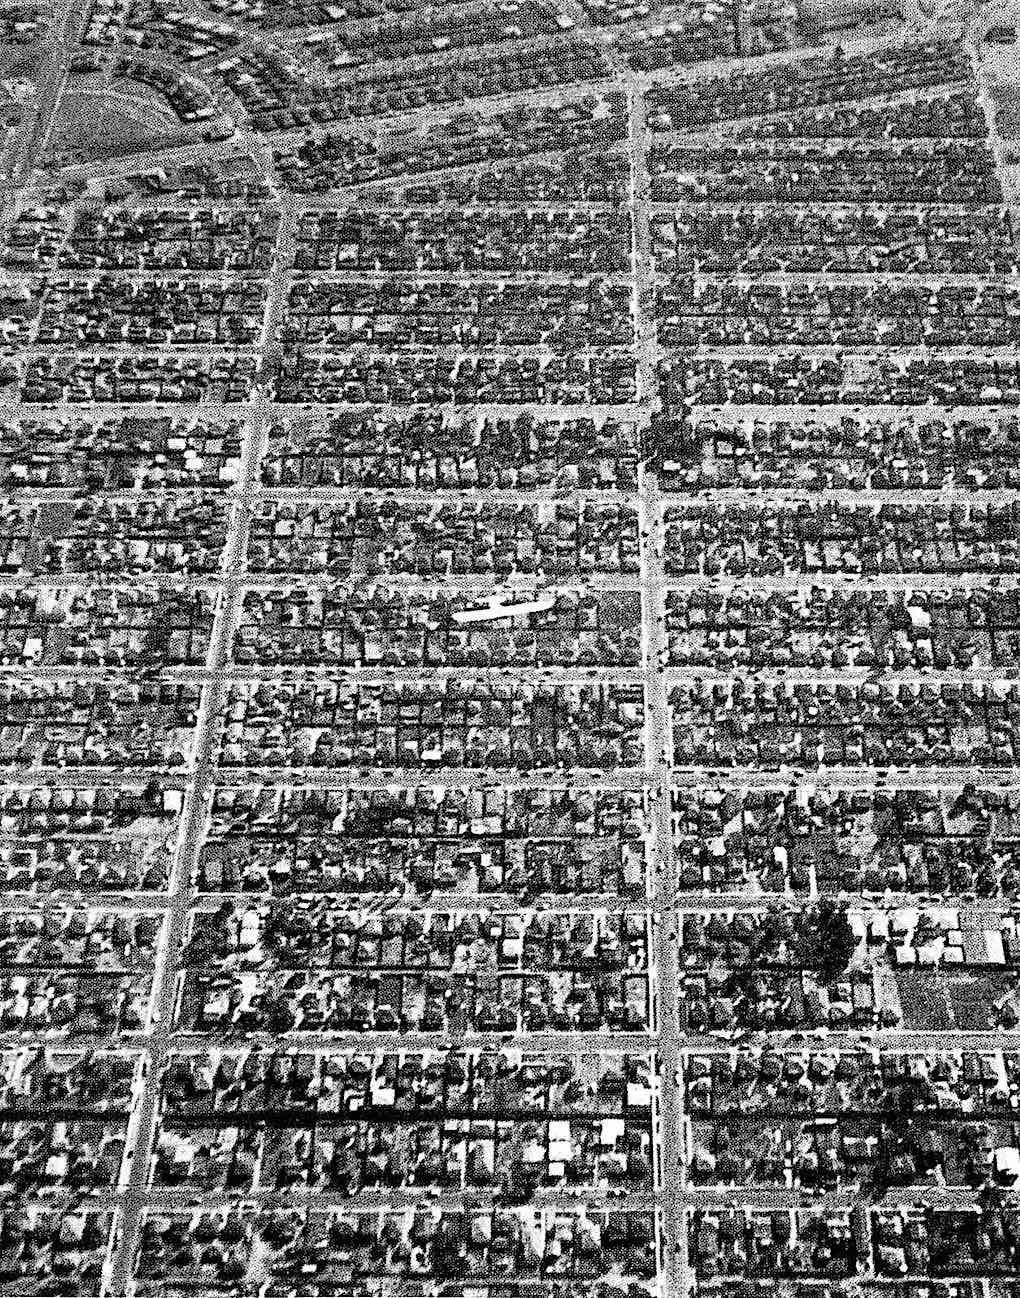 a 1963 suburb, from a birdseye view photograph